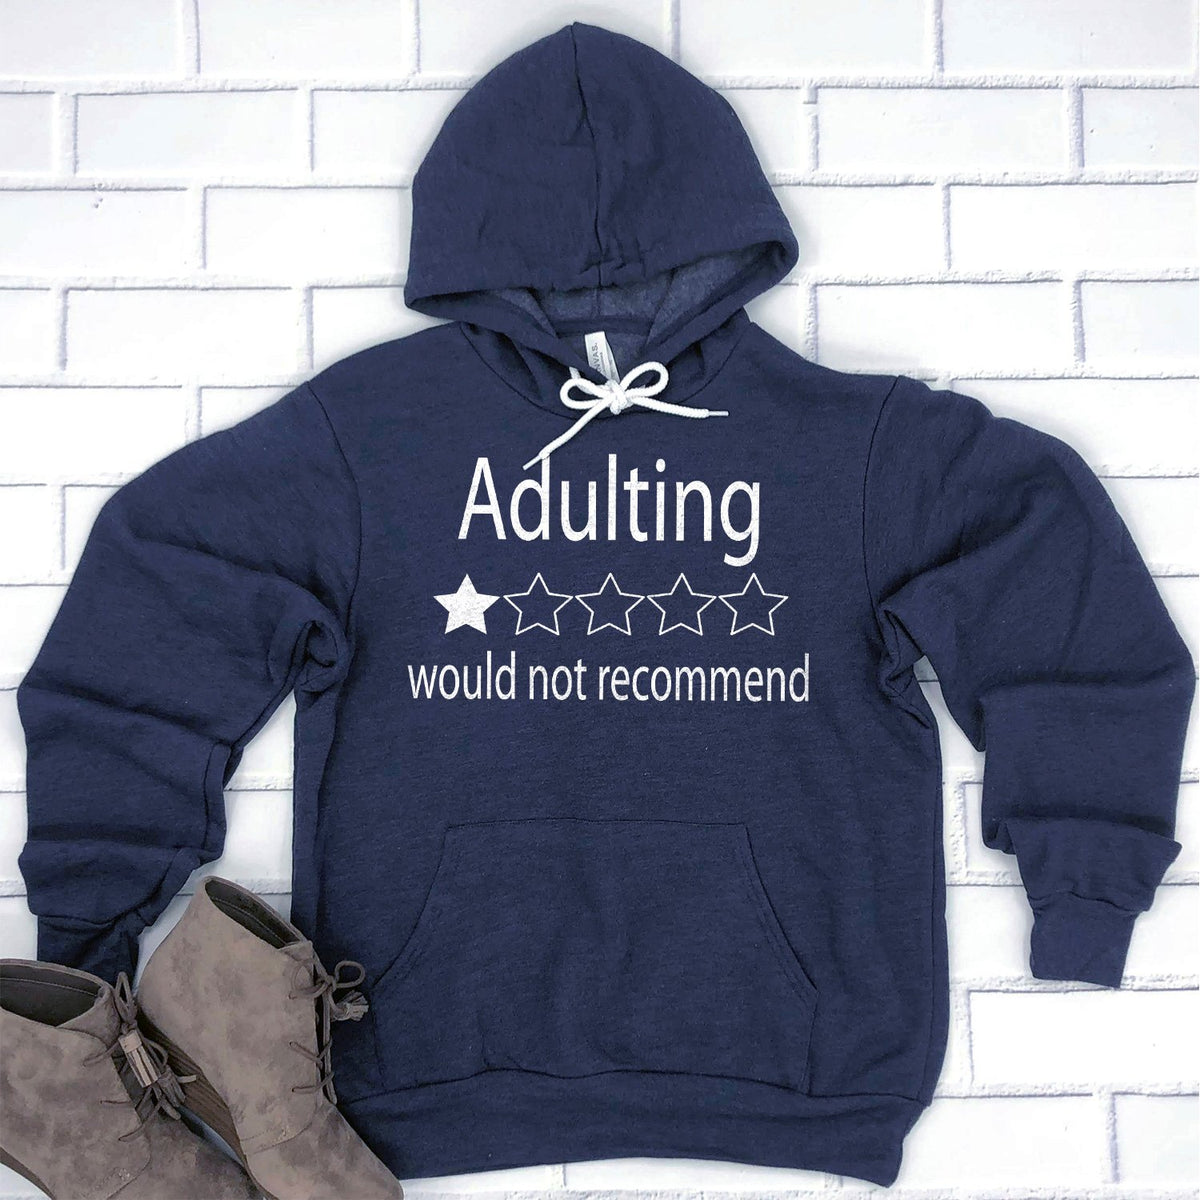 Adulting Would Not Recommend - Hoodie Sweatshirt